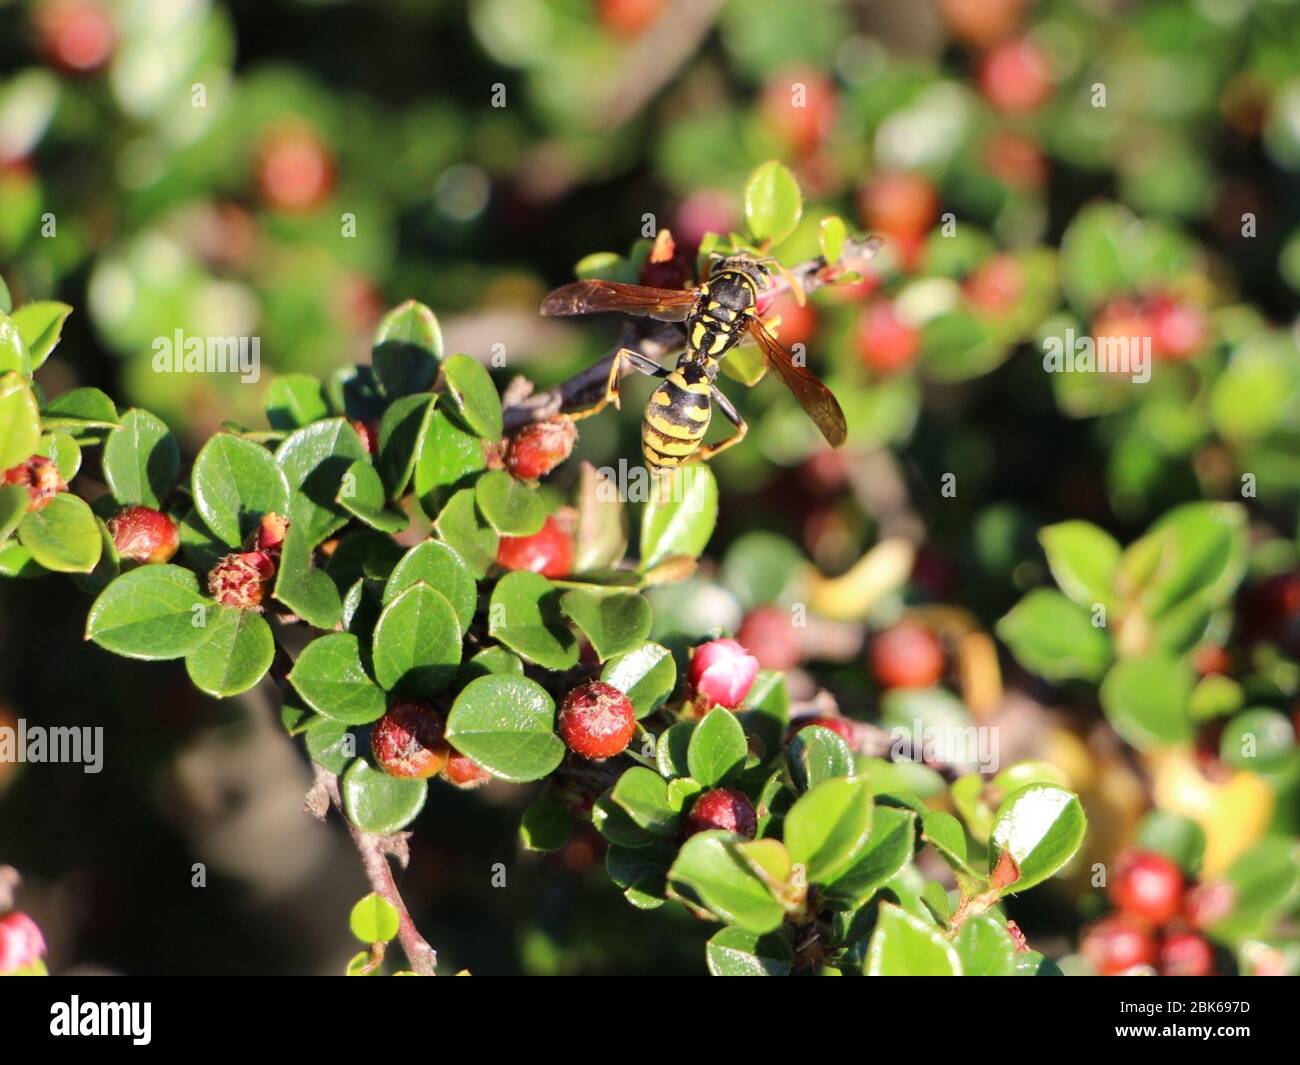 Vespa crabro germano European hornet on a branch of a bush with red berries Stock Photo